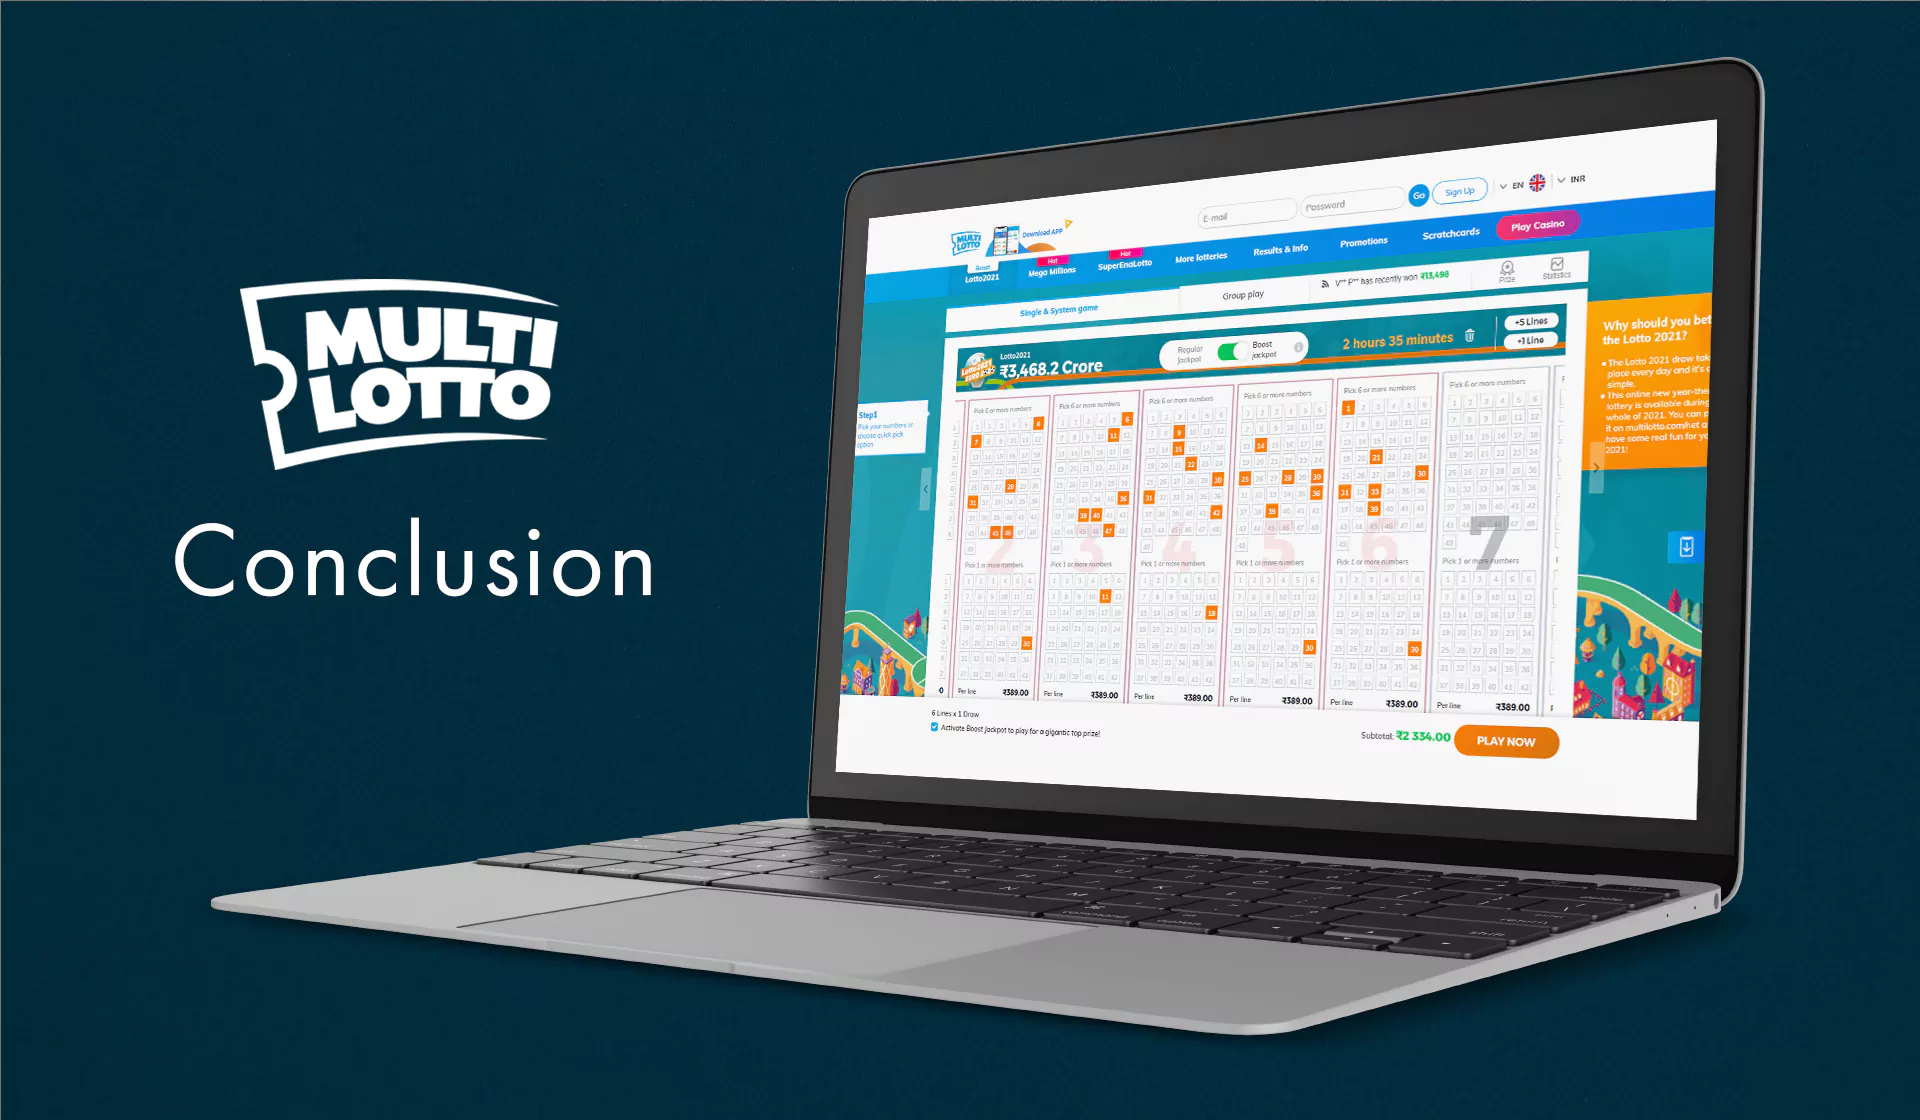 MultiLotto is a trustworthy and legit site that sells tickets to lots of international lotteries from all over the world.